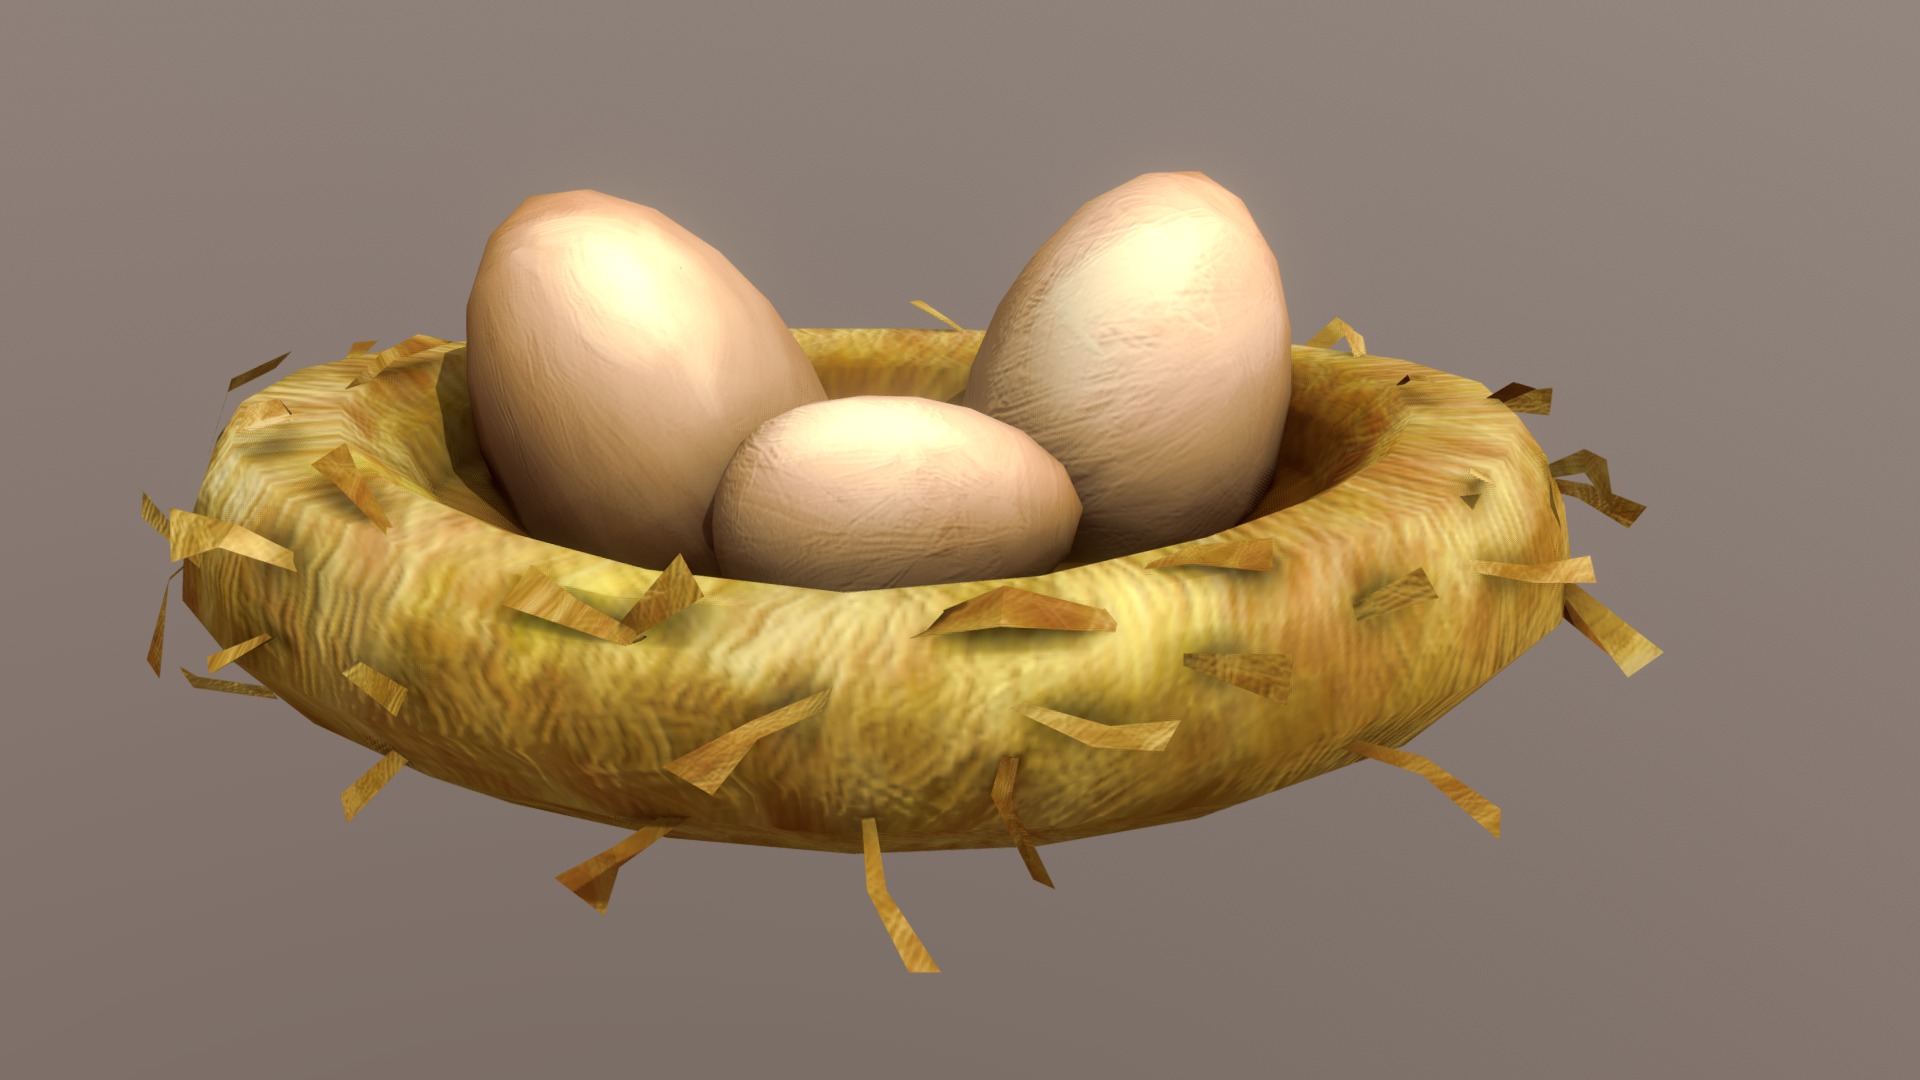 made this for class ages ago and i thought i better upload it bc why not

its the first proper thing i made i think

wowee - low poly egg nest - 3D model by bridgedpolys 3d model